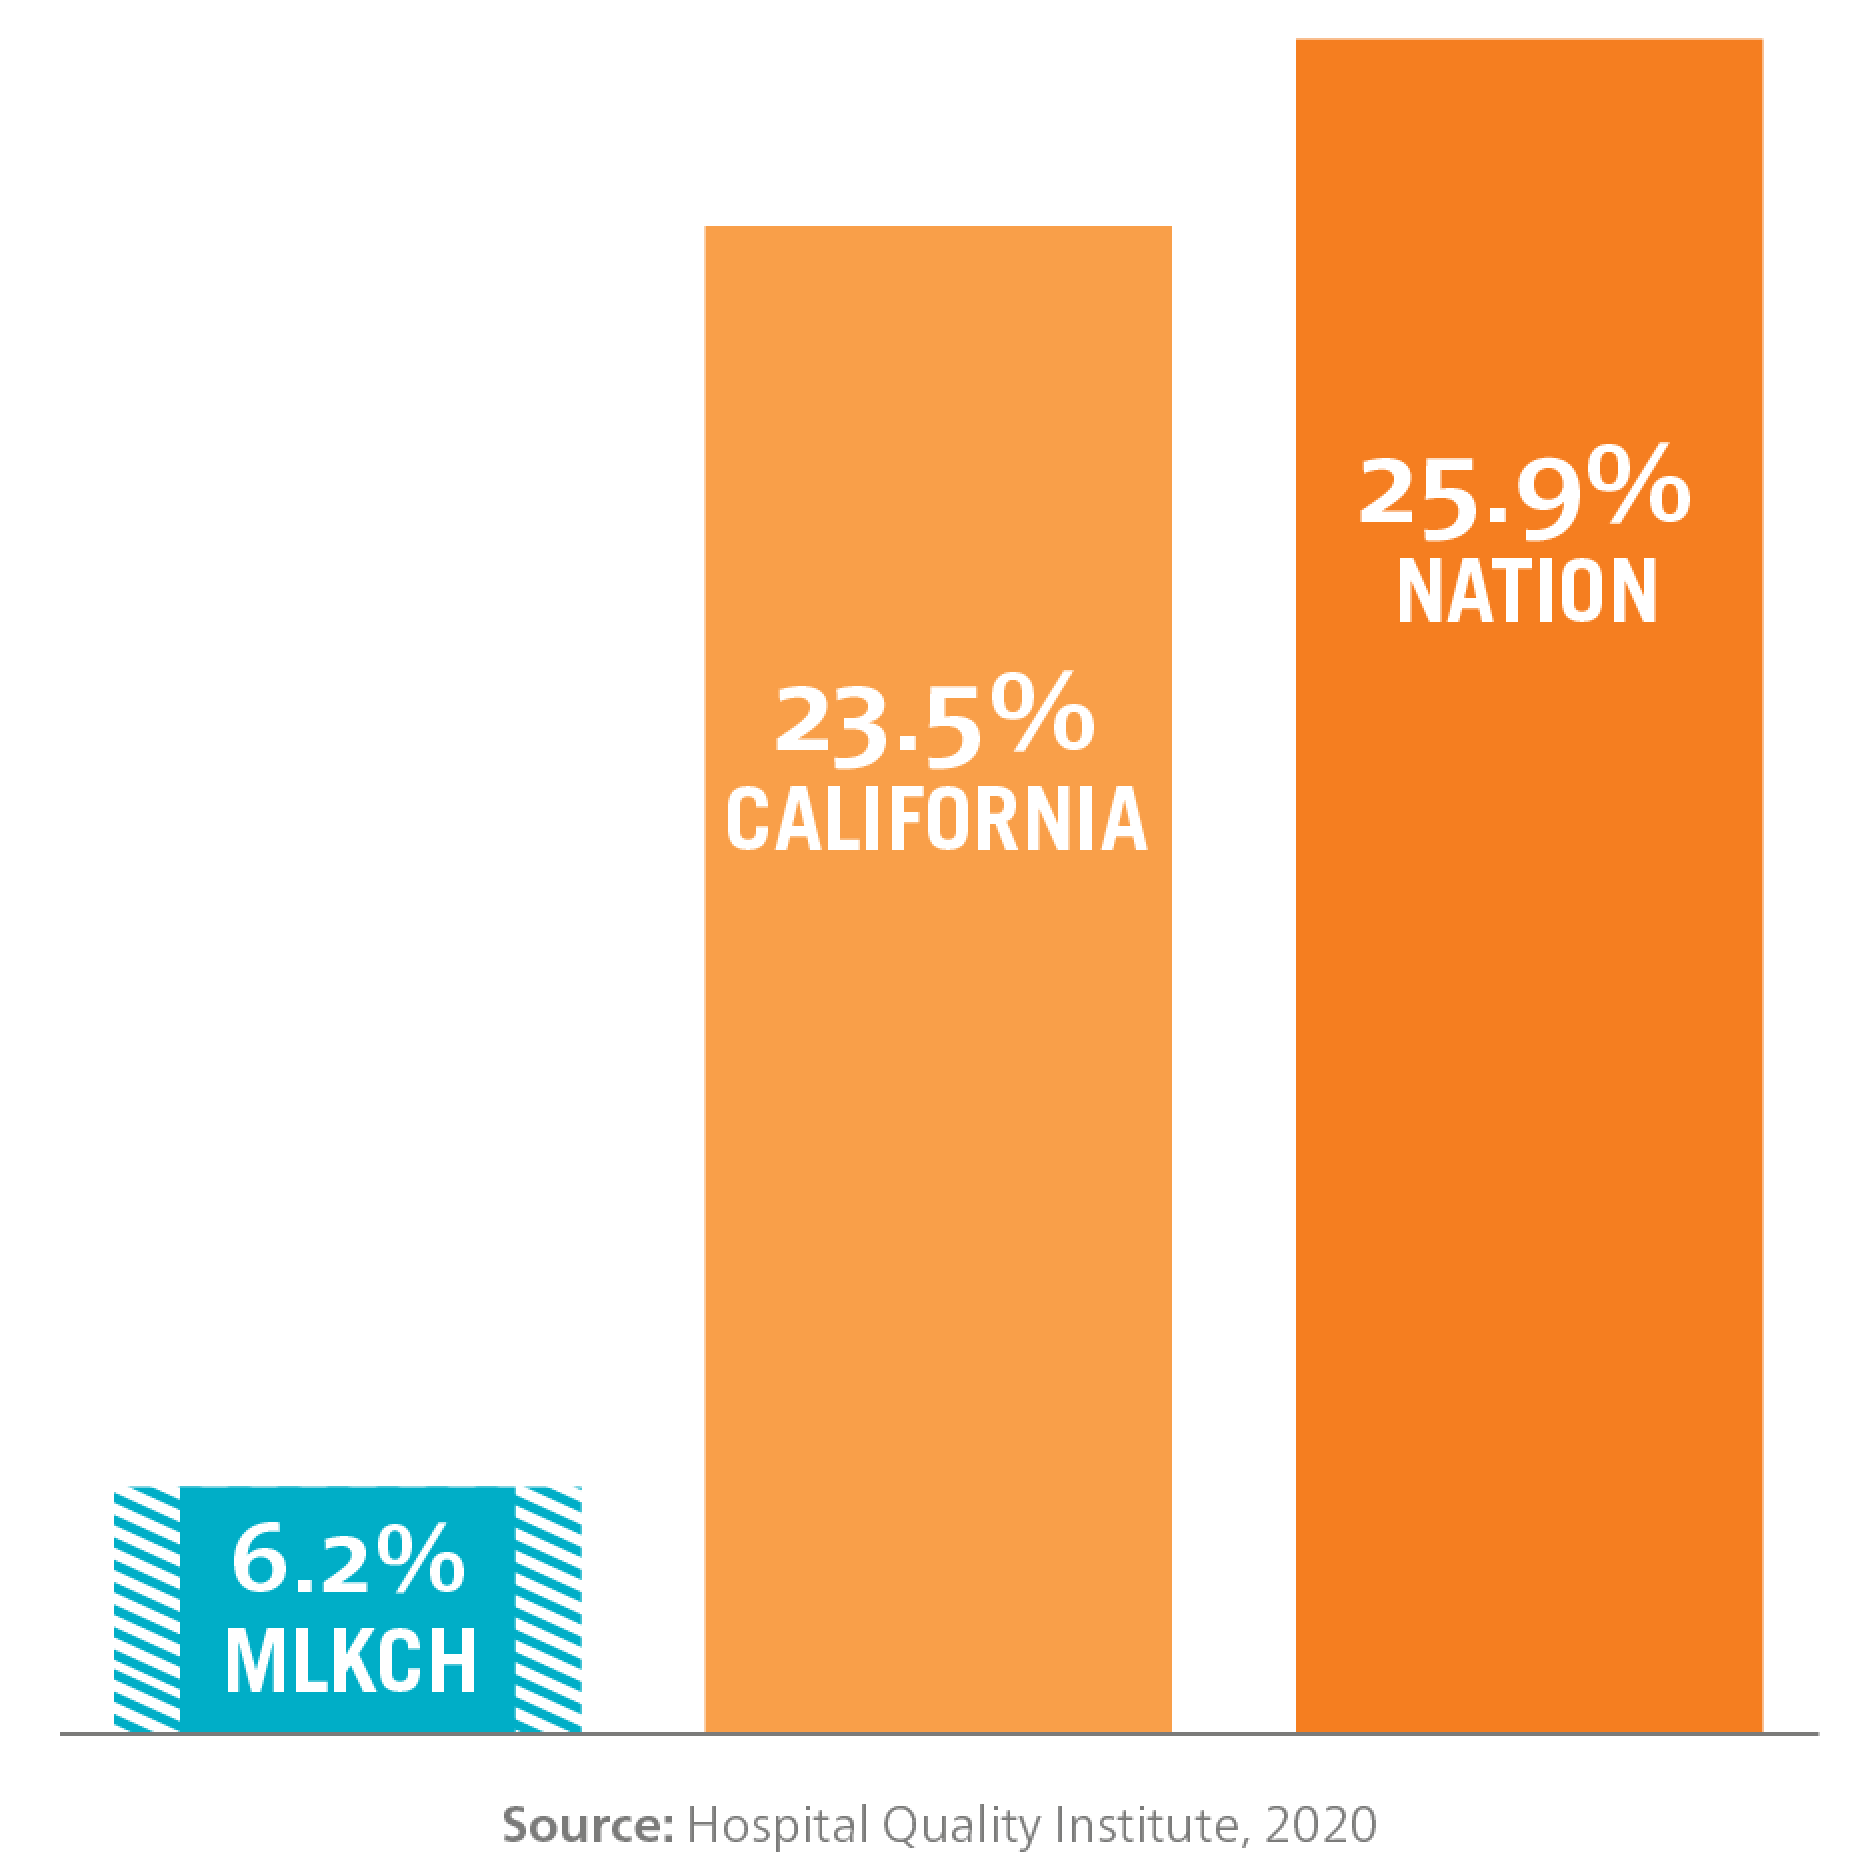 Bar chart for data comparing C-section rates. MLKCH is at 6.2 percent, California is at 23.5 percent and the nation is at 25.9 percent.